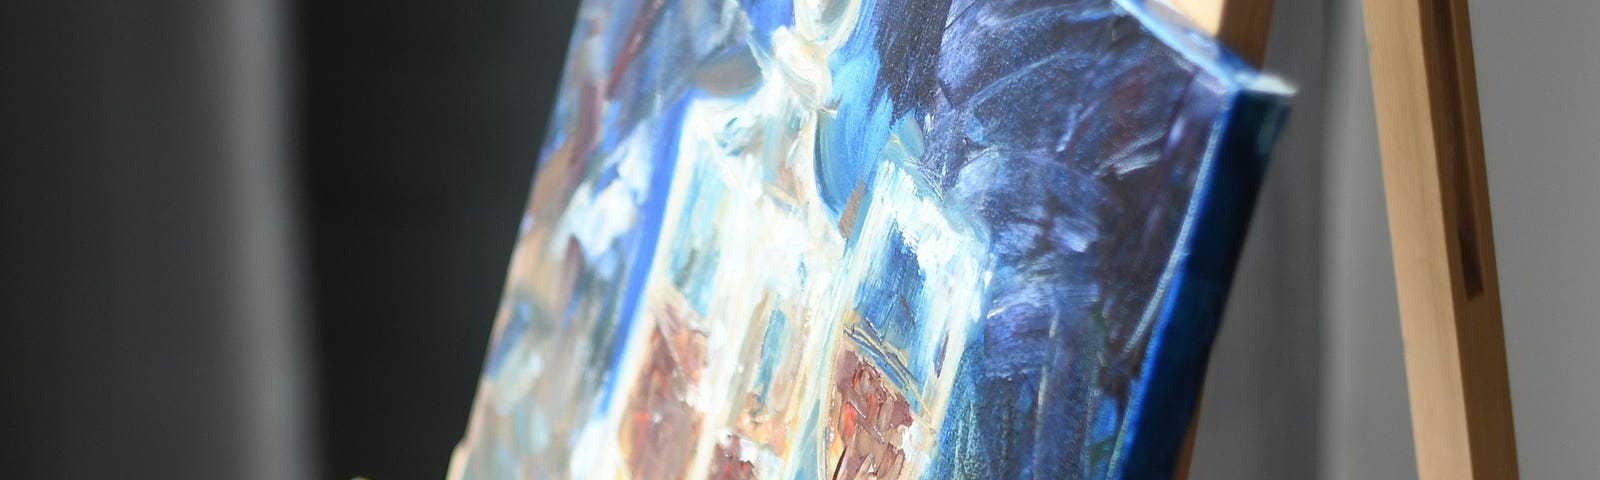 a painting on an easel- there are dark blues, whites, surrounding a glass and carafe